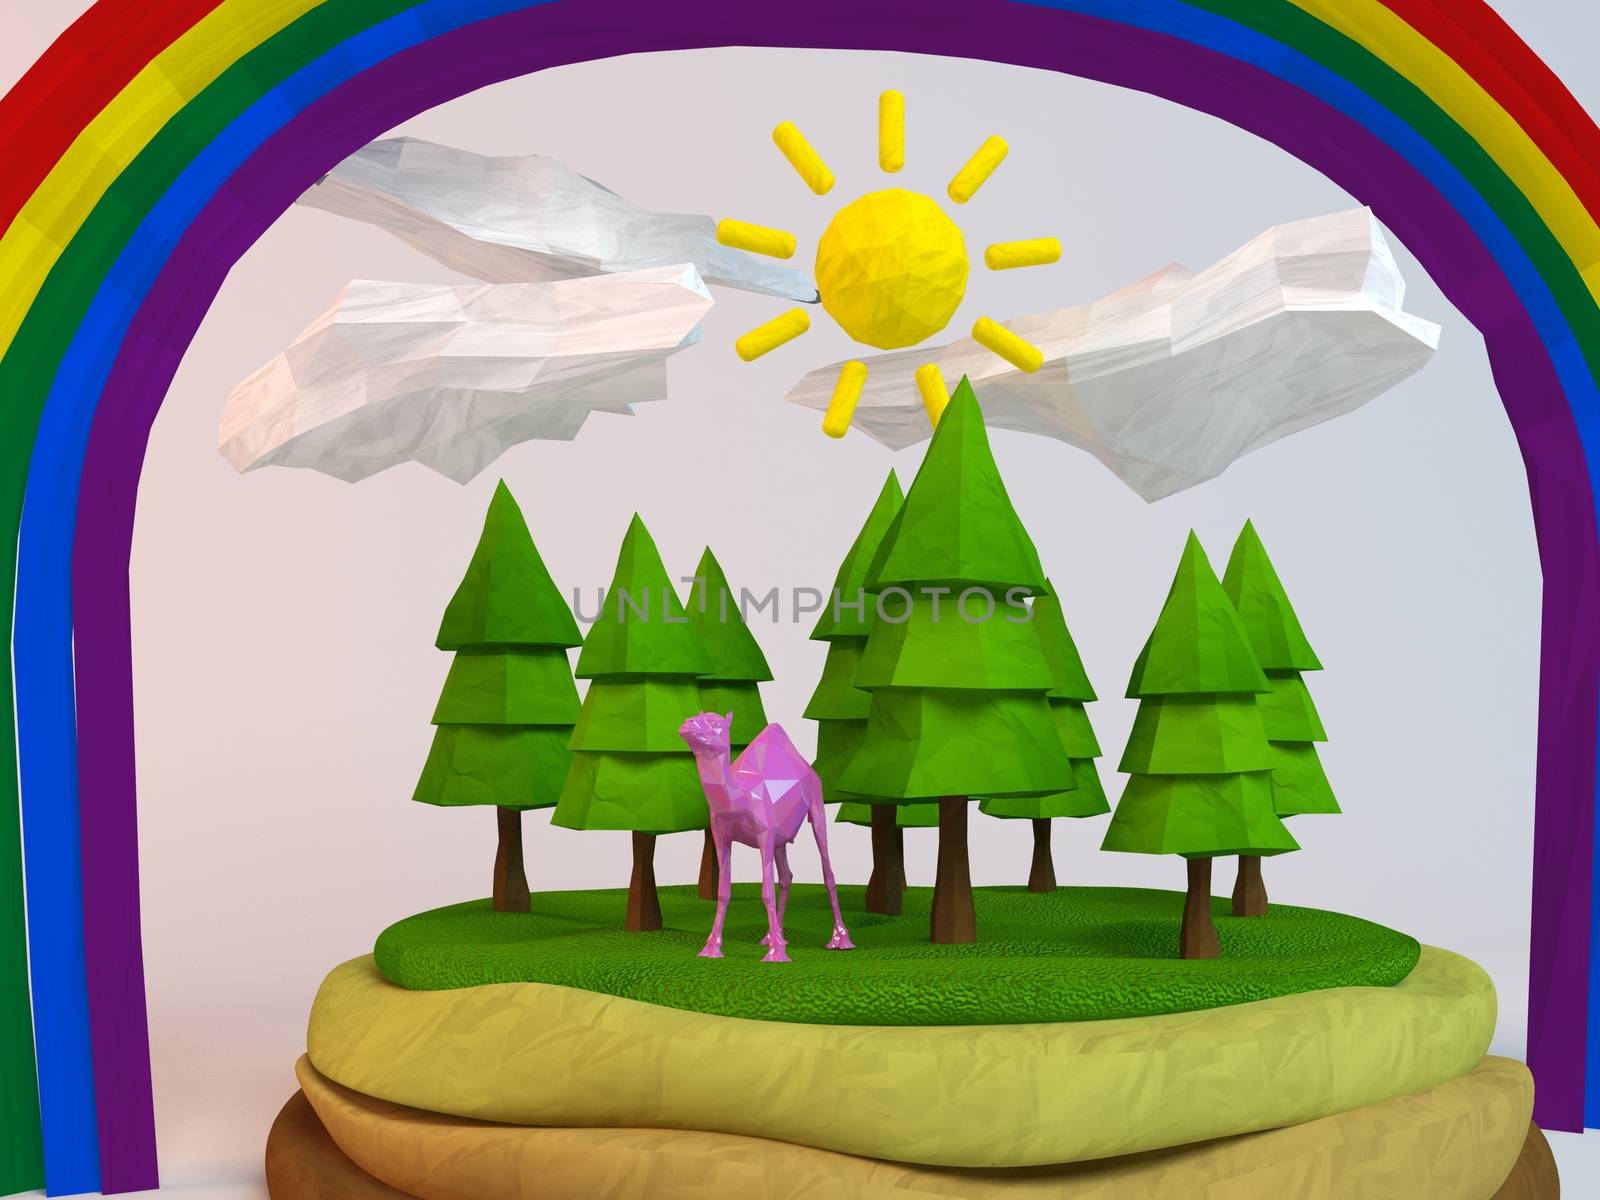 3d camel inside a low-poly green scene with sun, trees, clouds and a rainbow